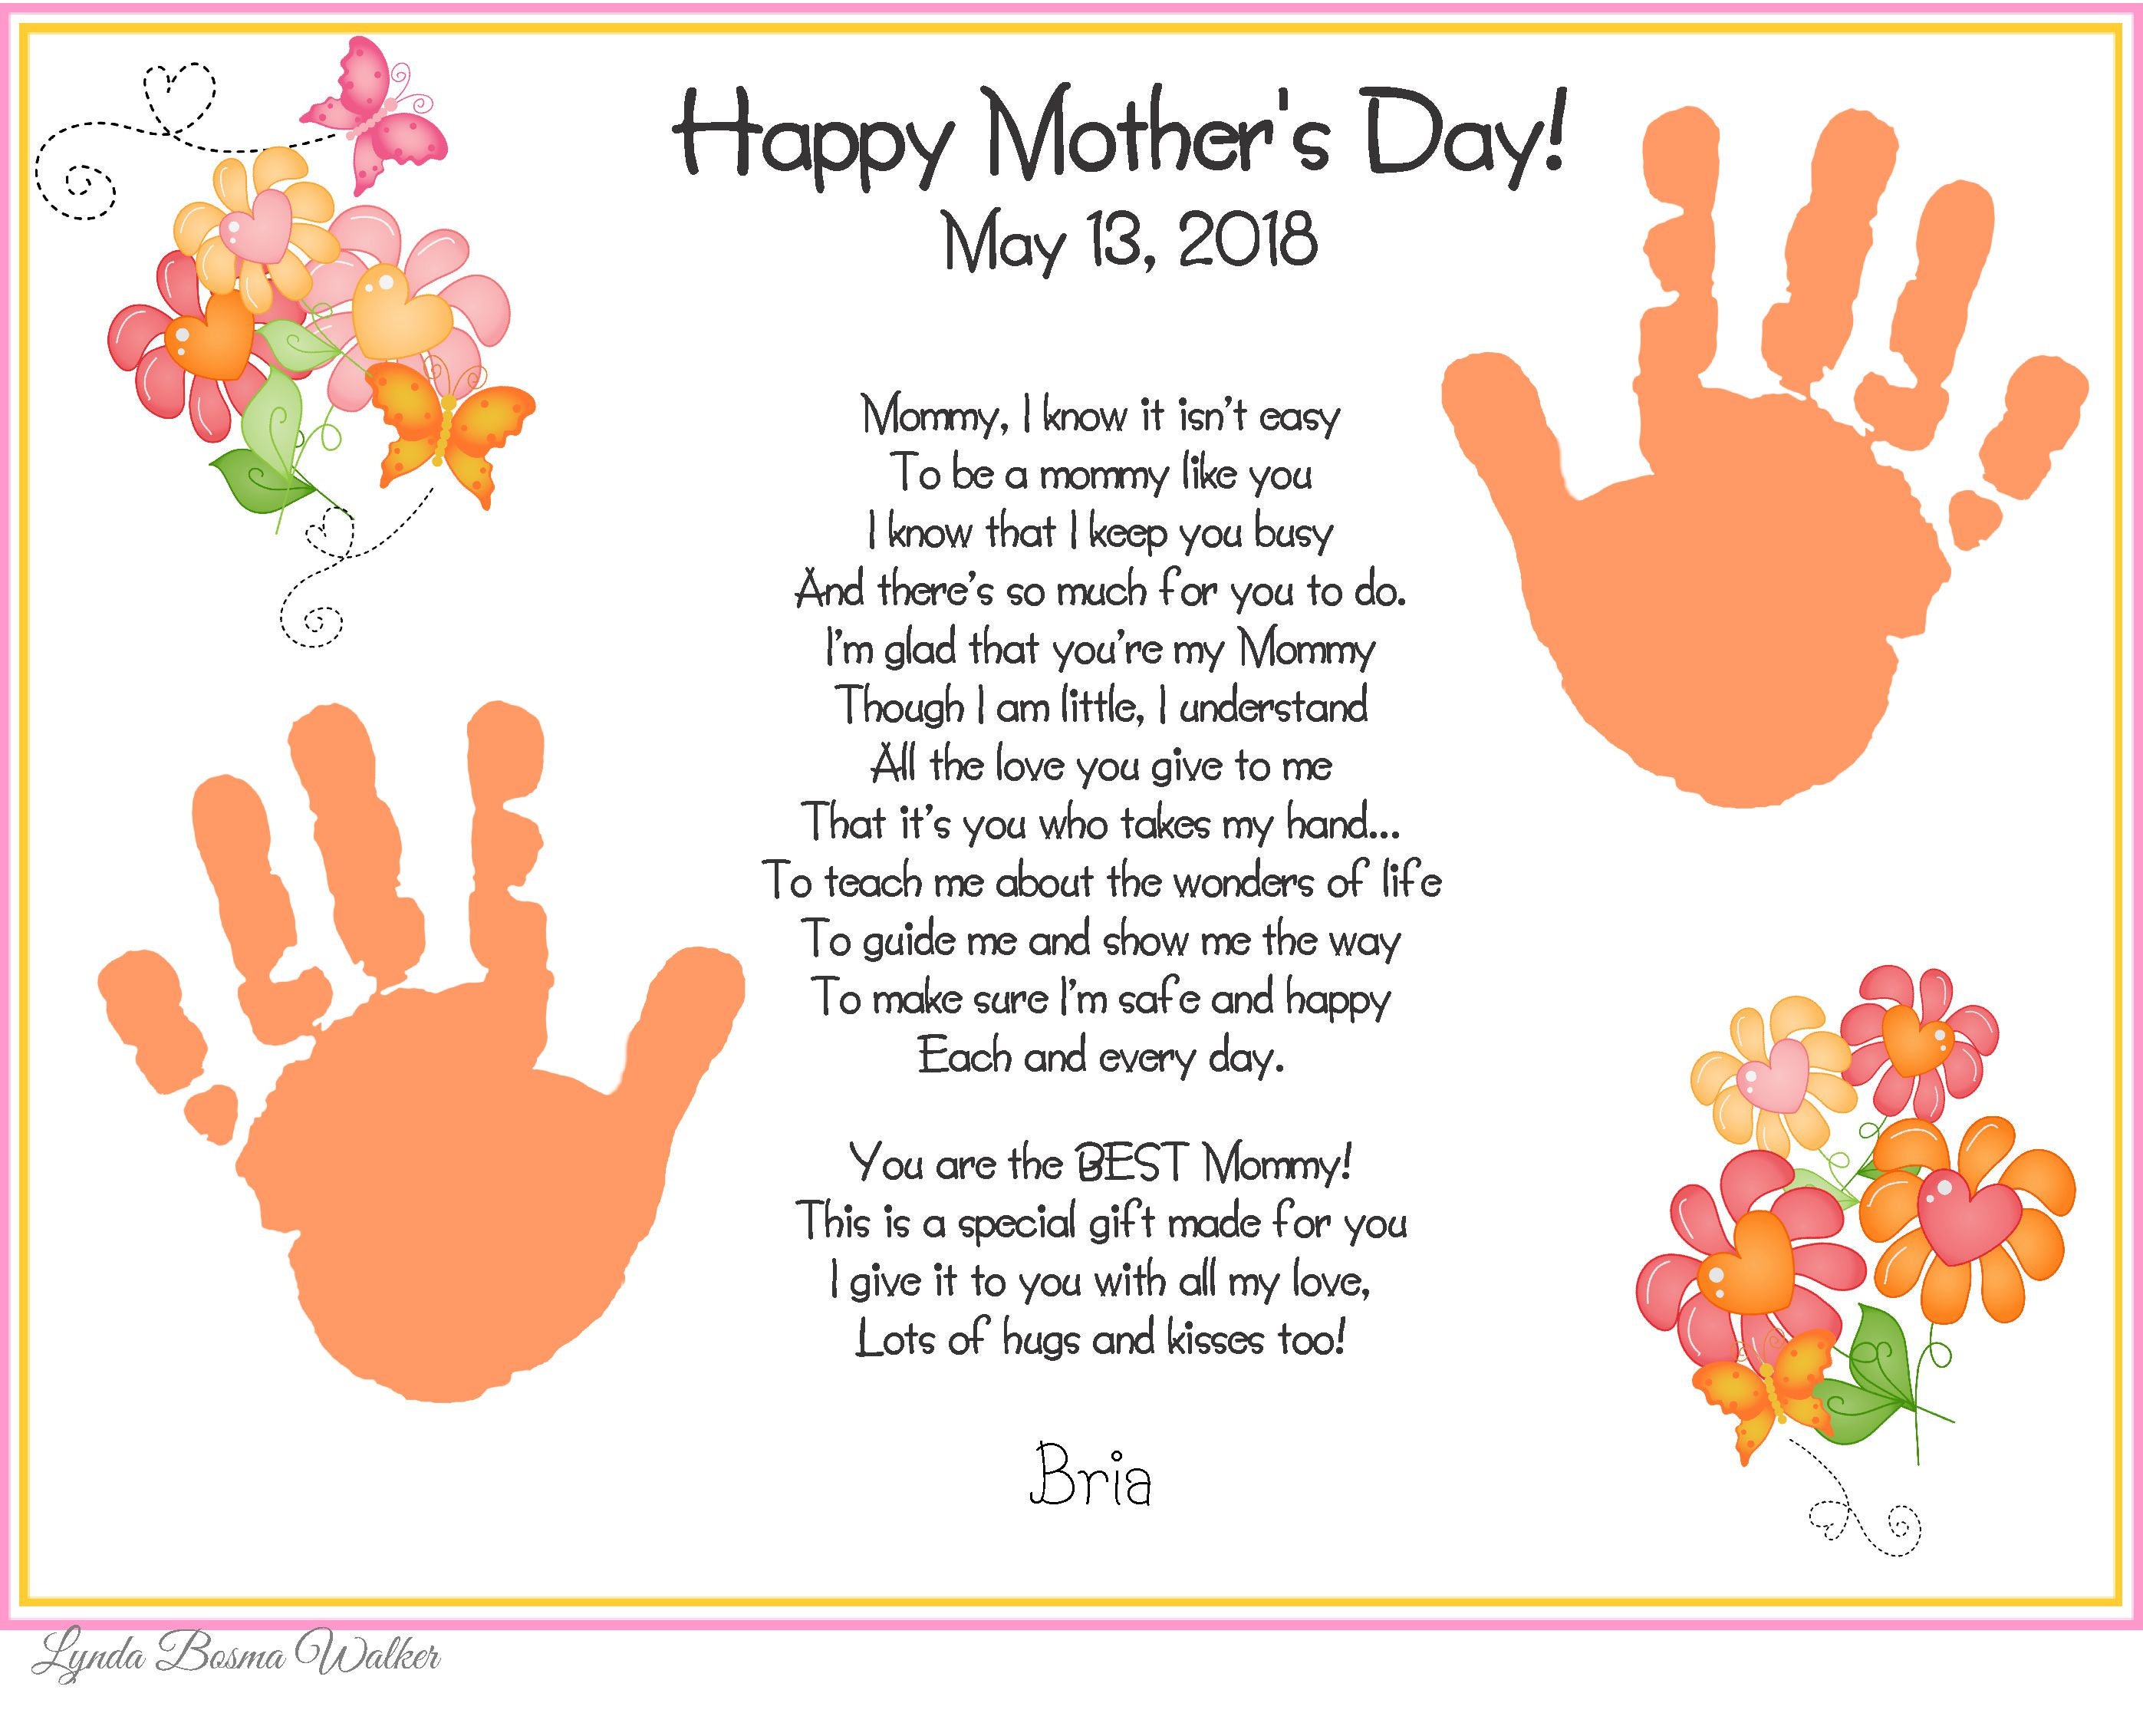 a-mommy-like-you-handprints-poem-mother-s-day-gift-for